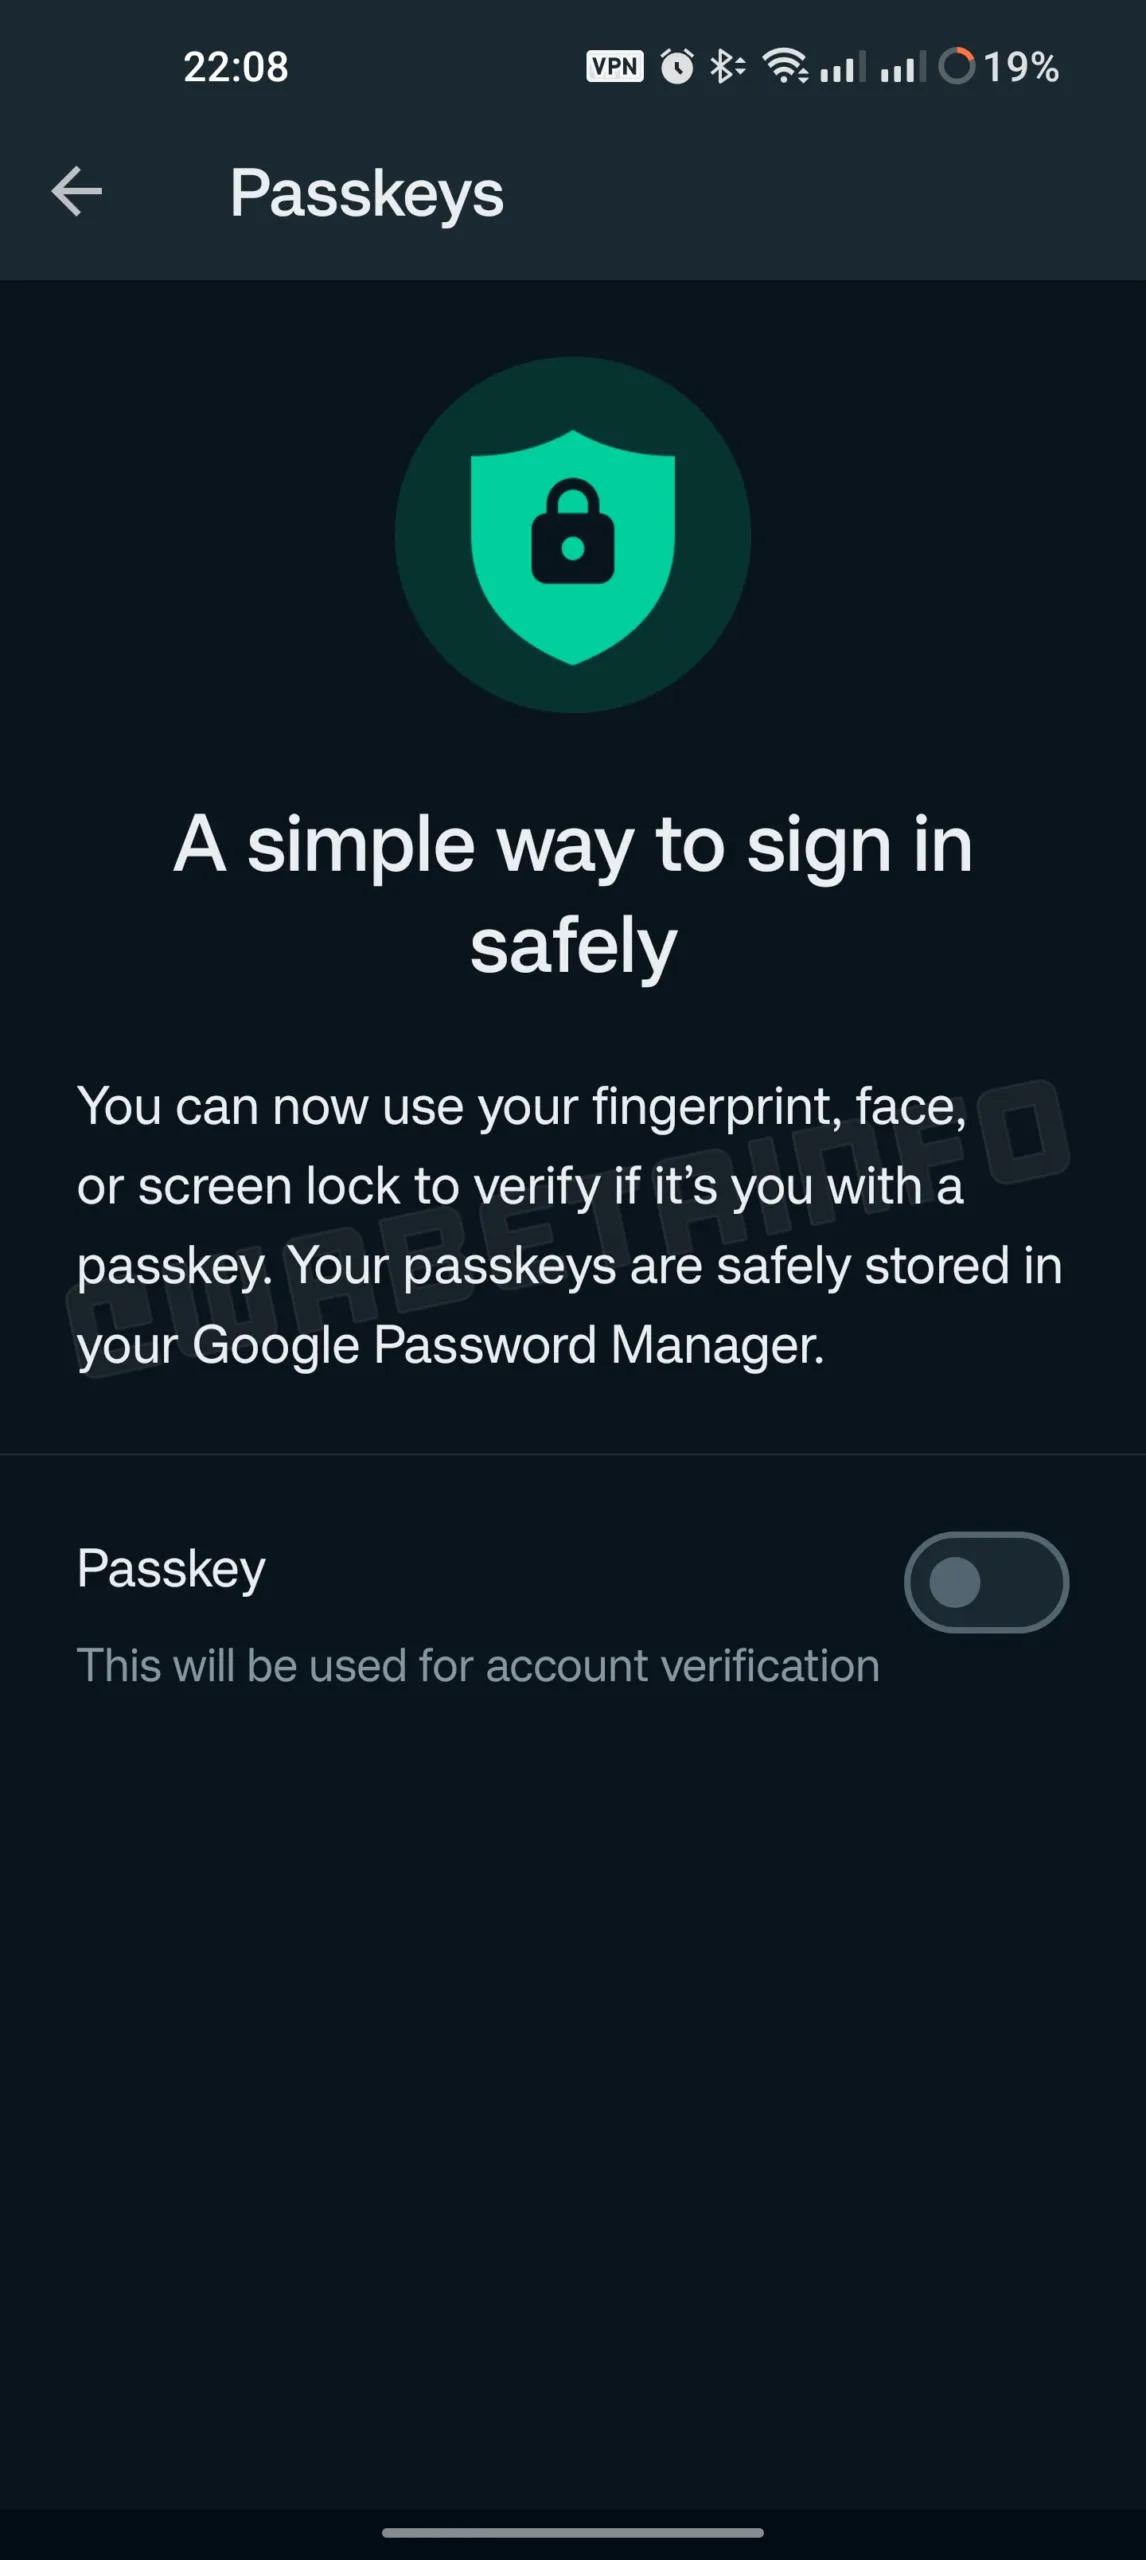 WA PASSKEY FEATURE ACCOUNT VERIF scaled